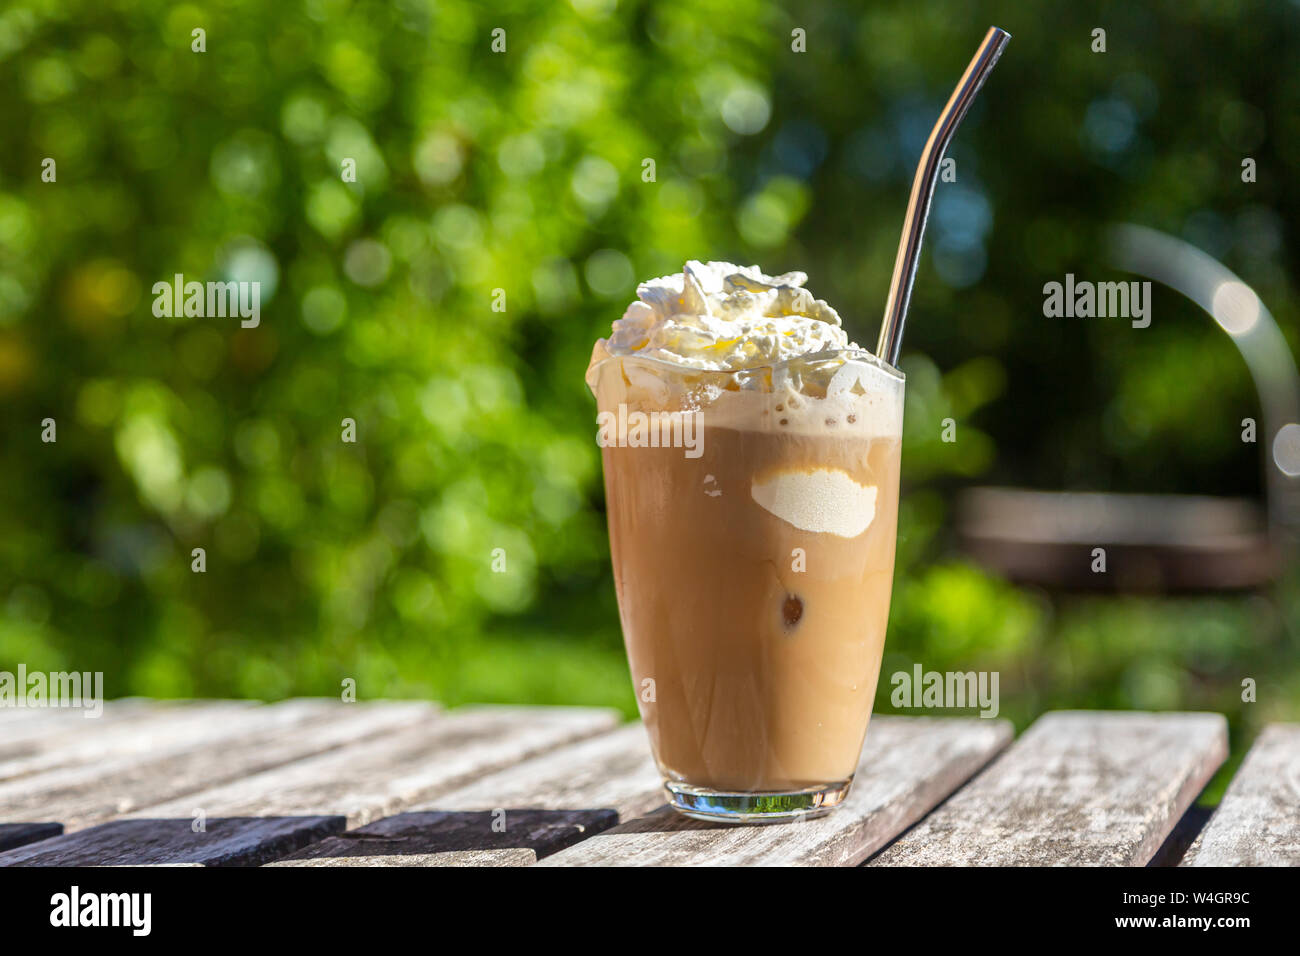 79,000+ Iced Coffee Pictures